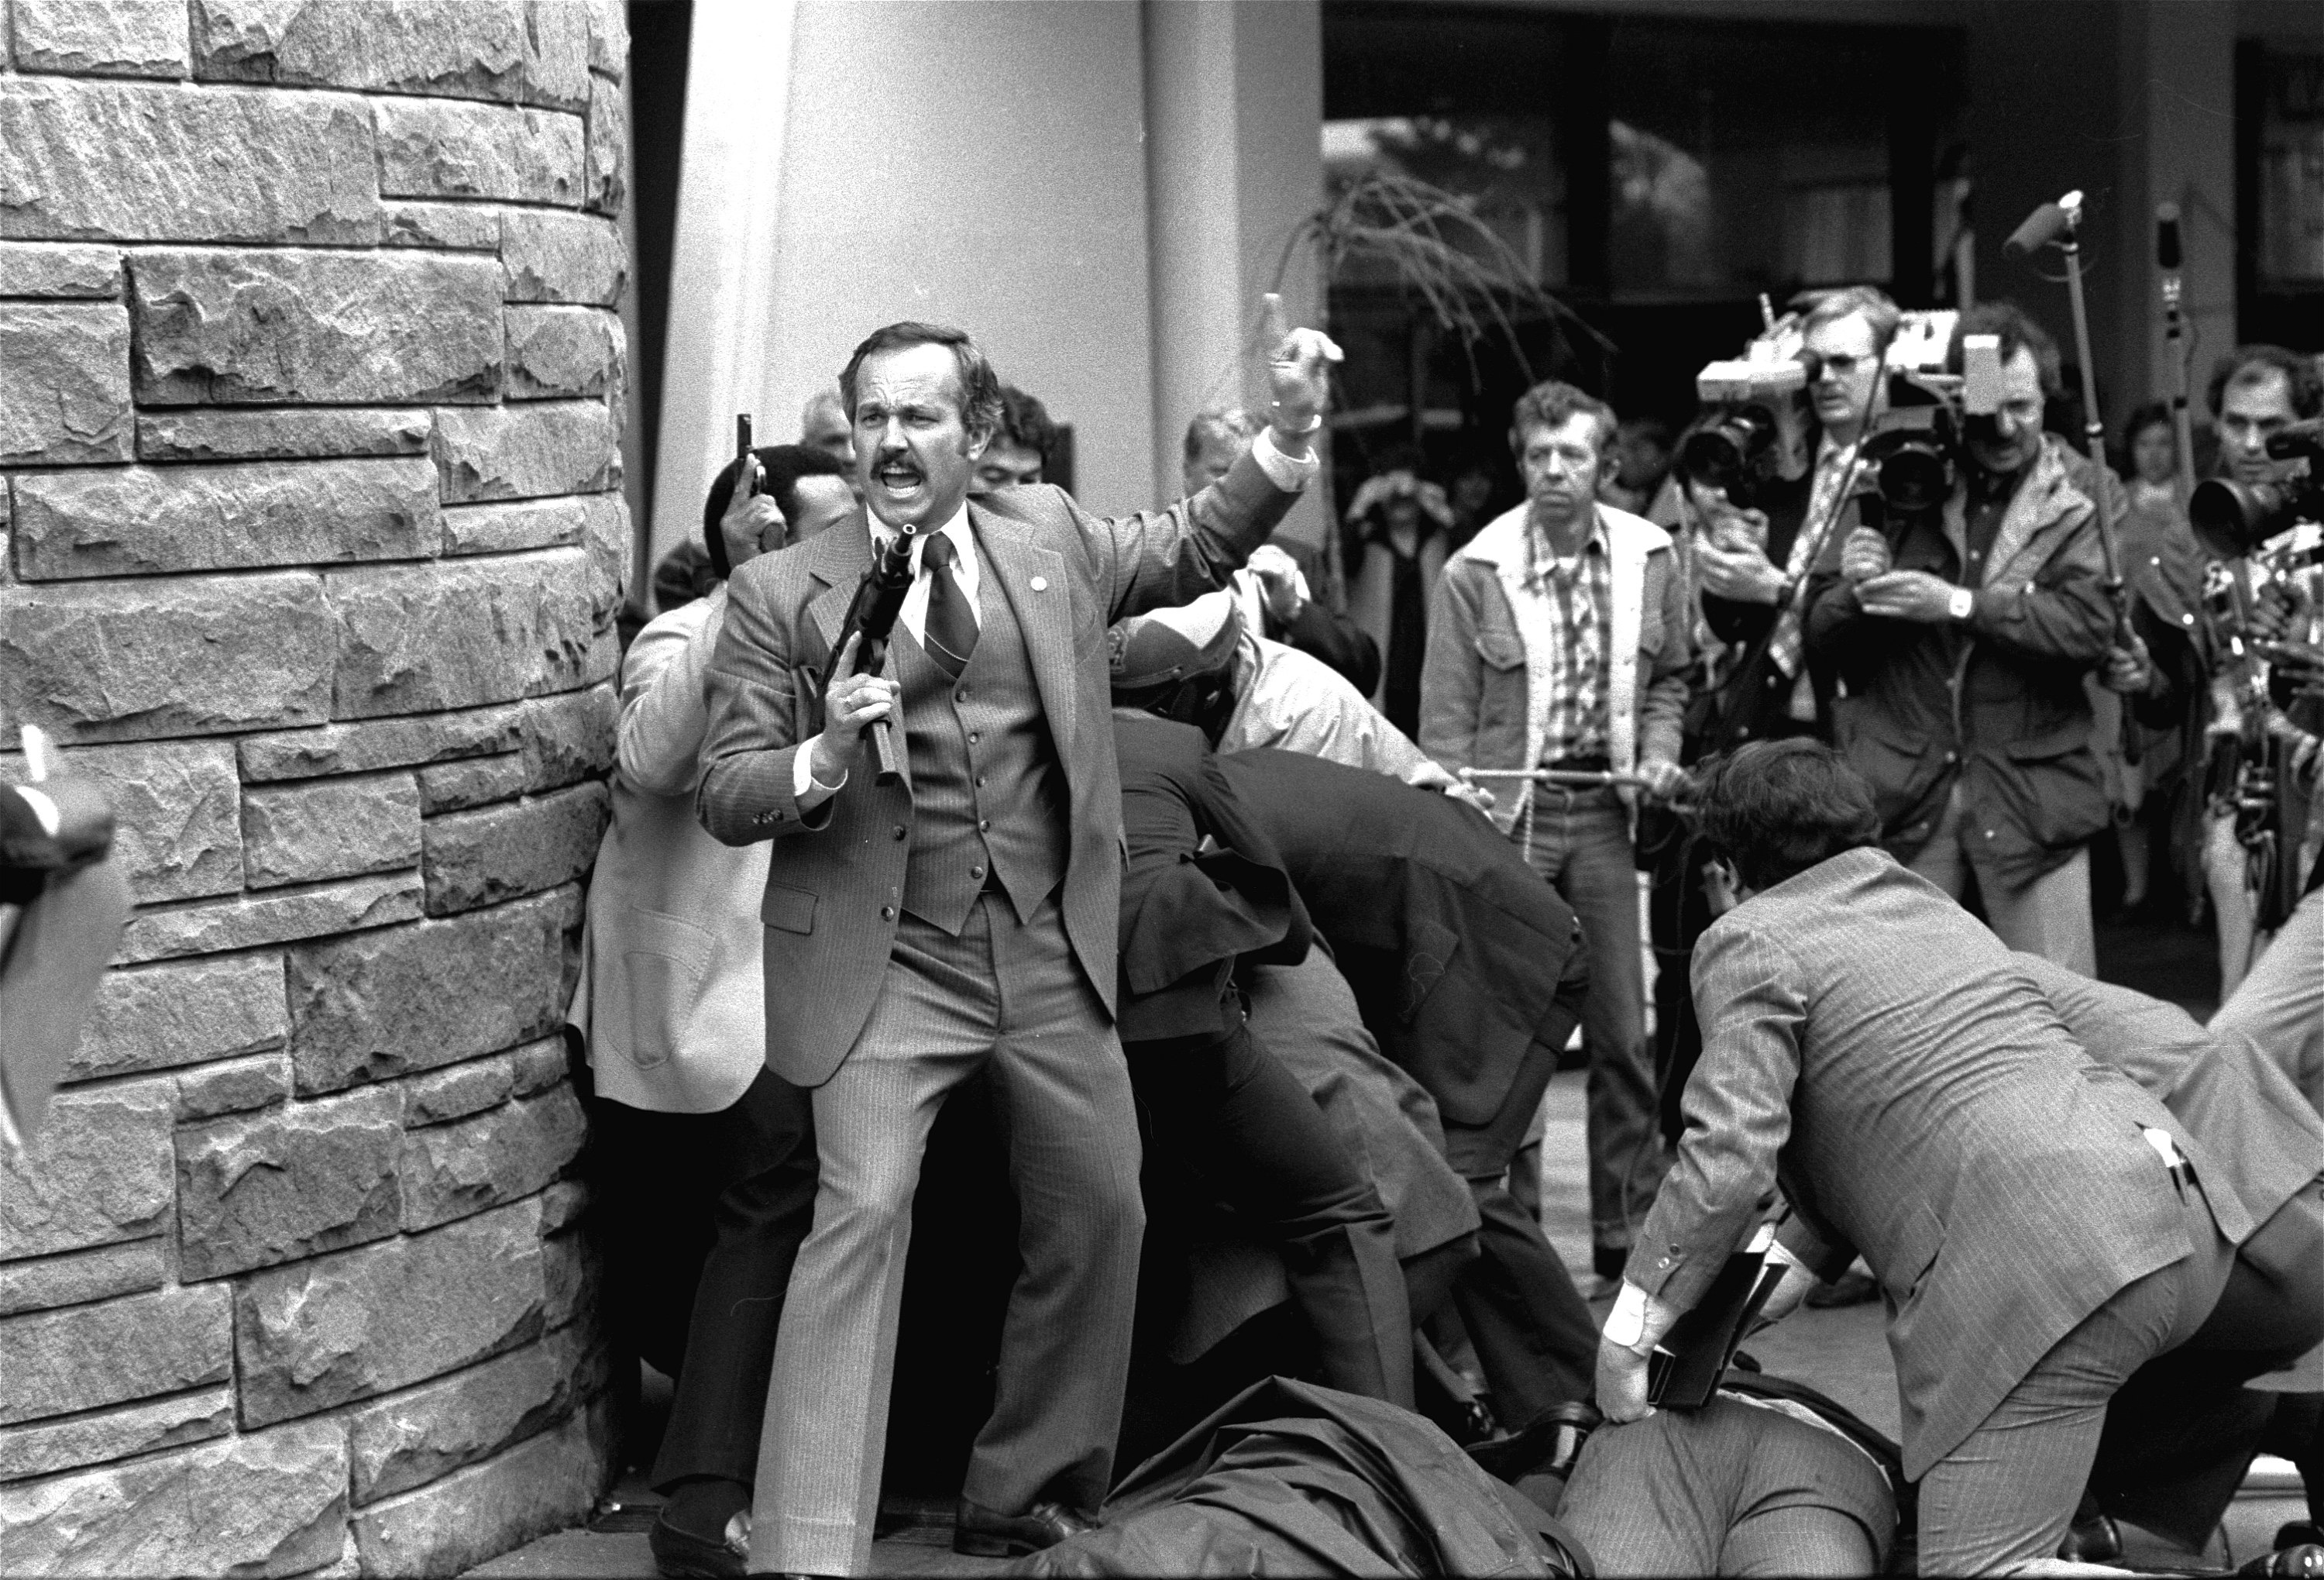 Must-see photos of the attempted assassination of President Ronald Reagan in 1981 - pennlive.com